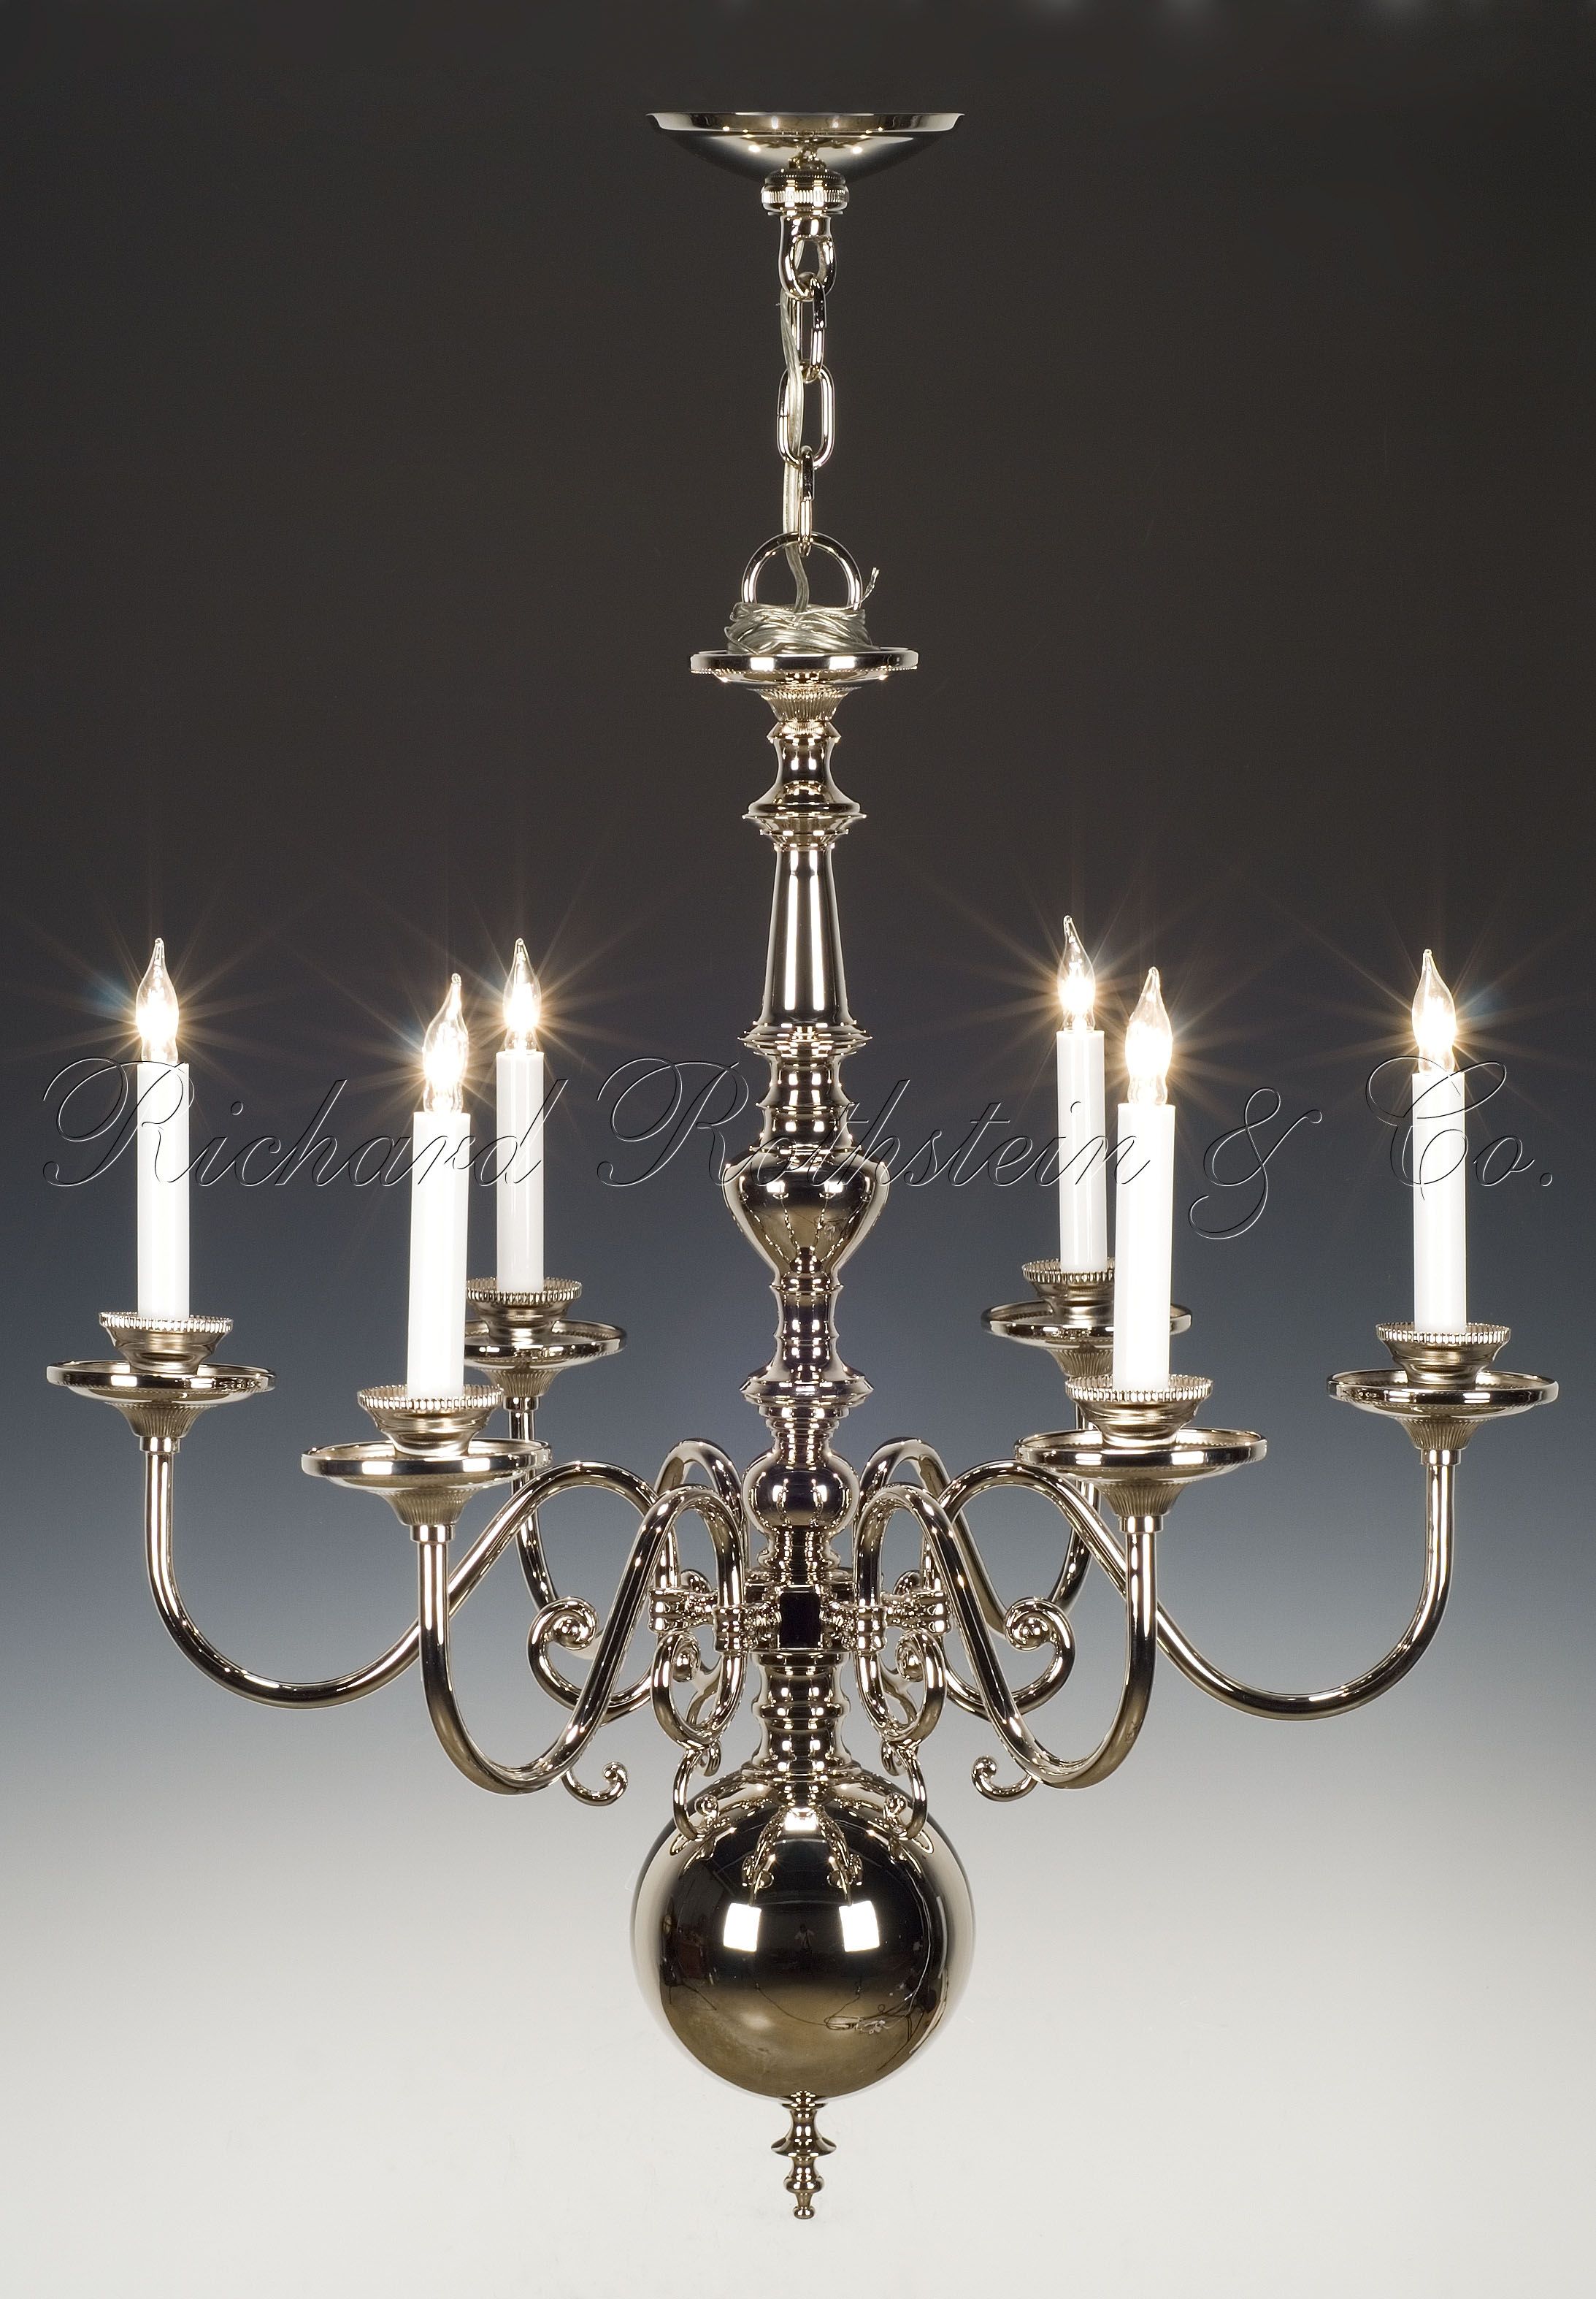 Silver Chandelier Superb For Inspirational Home Designing With With Regard To Silver Chandeliers (View 10 of 12)